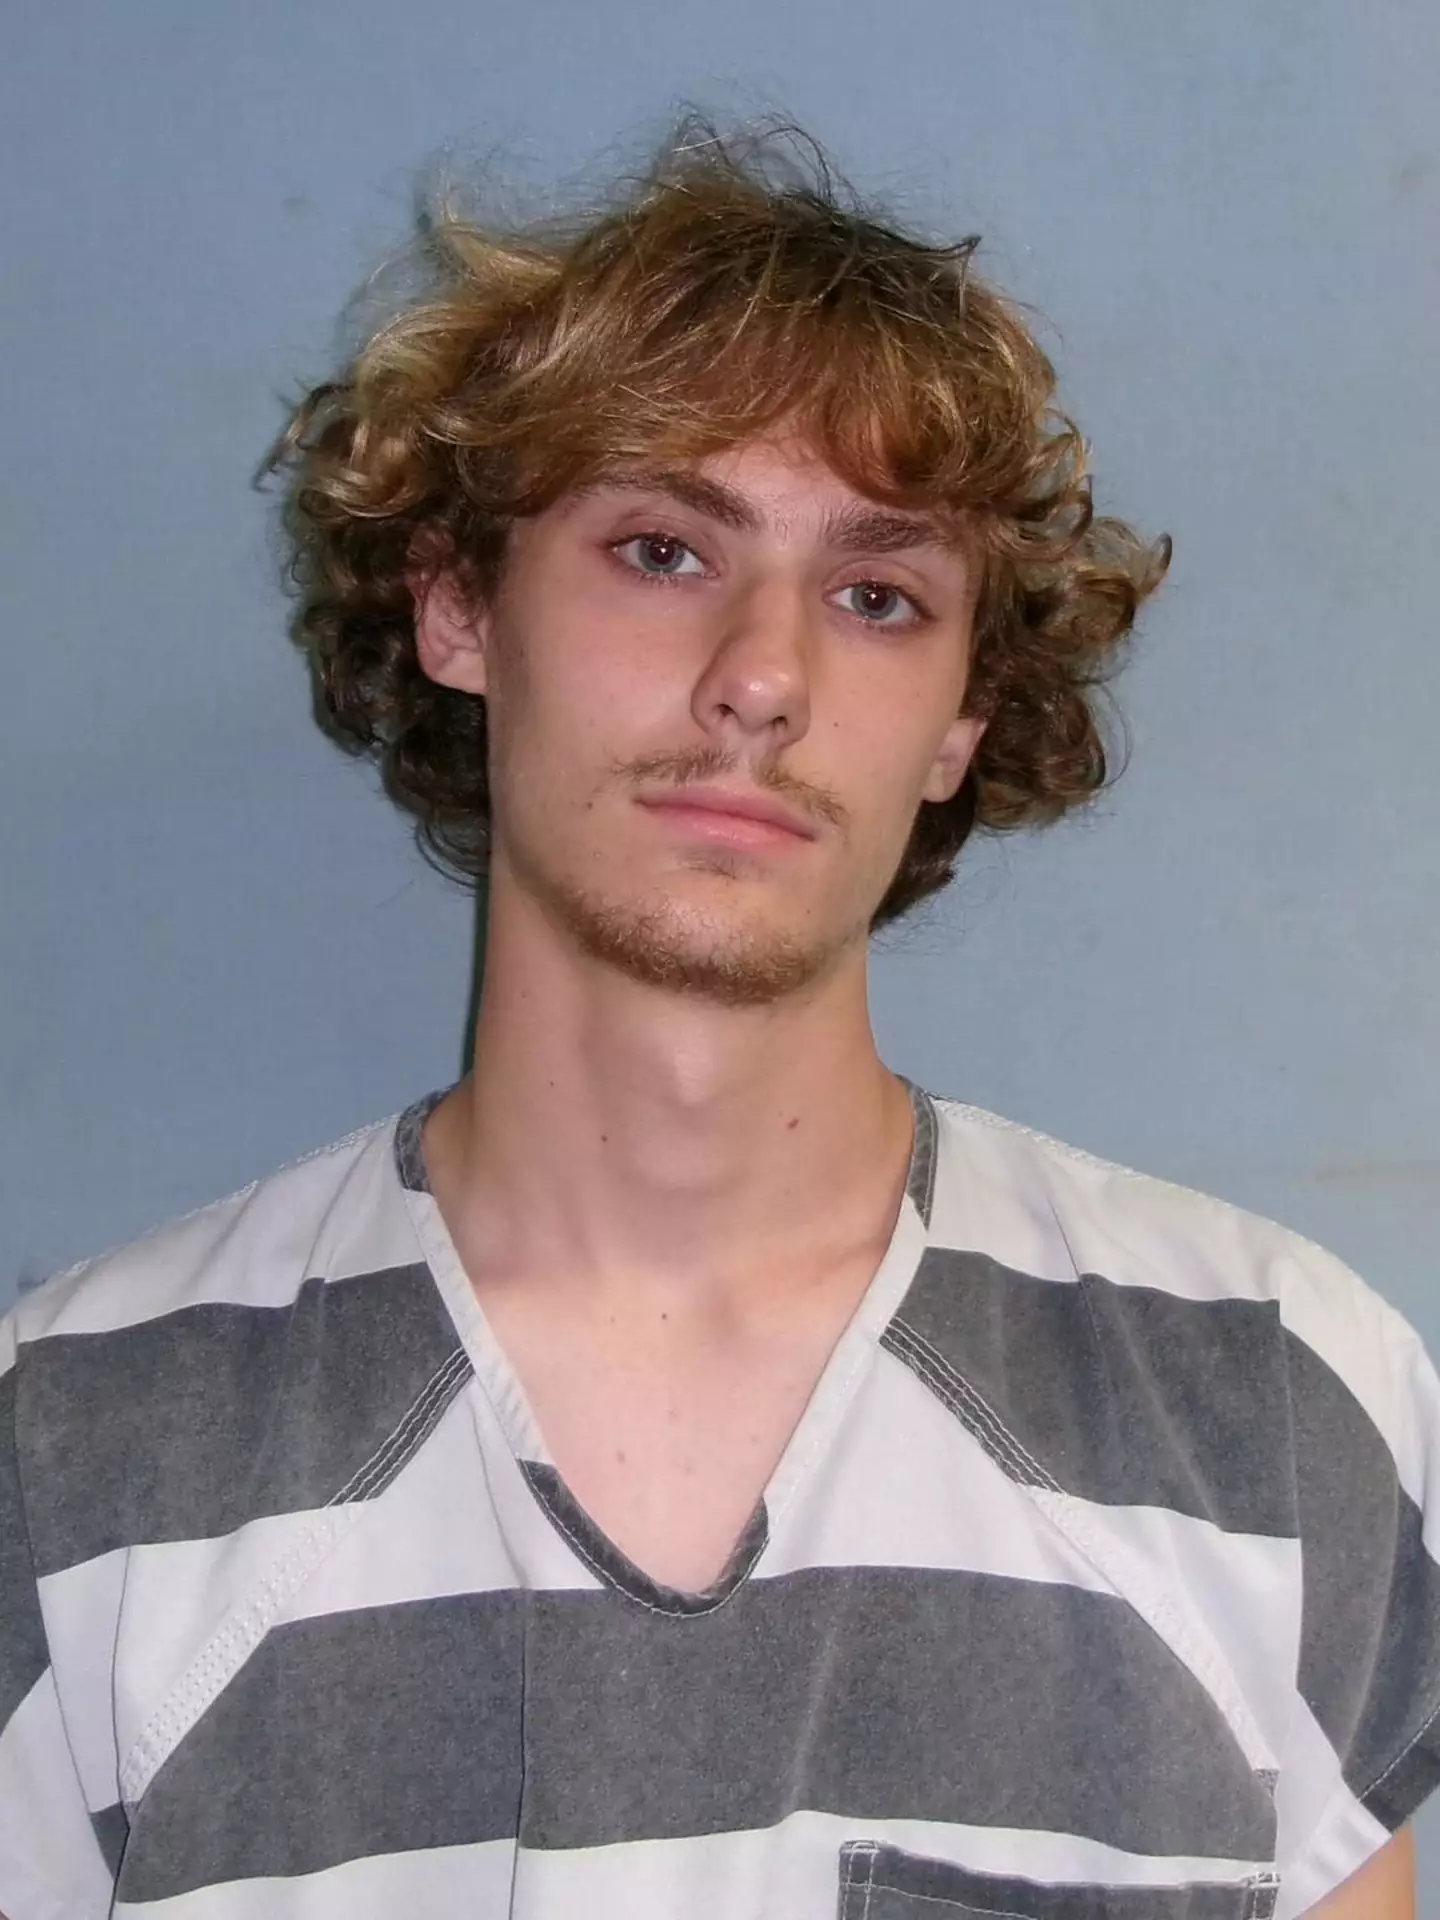 Brenden Jolly was apprehended on May 24. (Facebook/Friendswood Police Department)